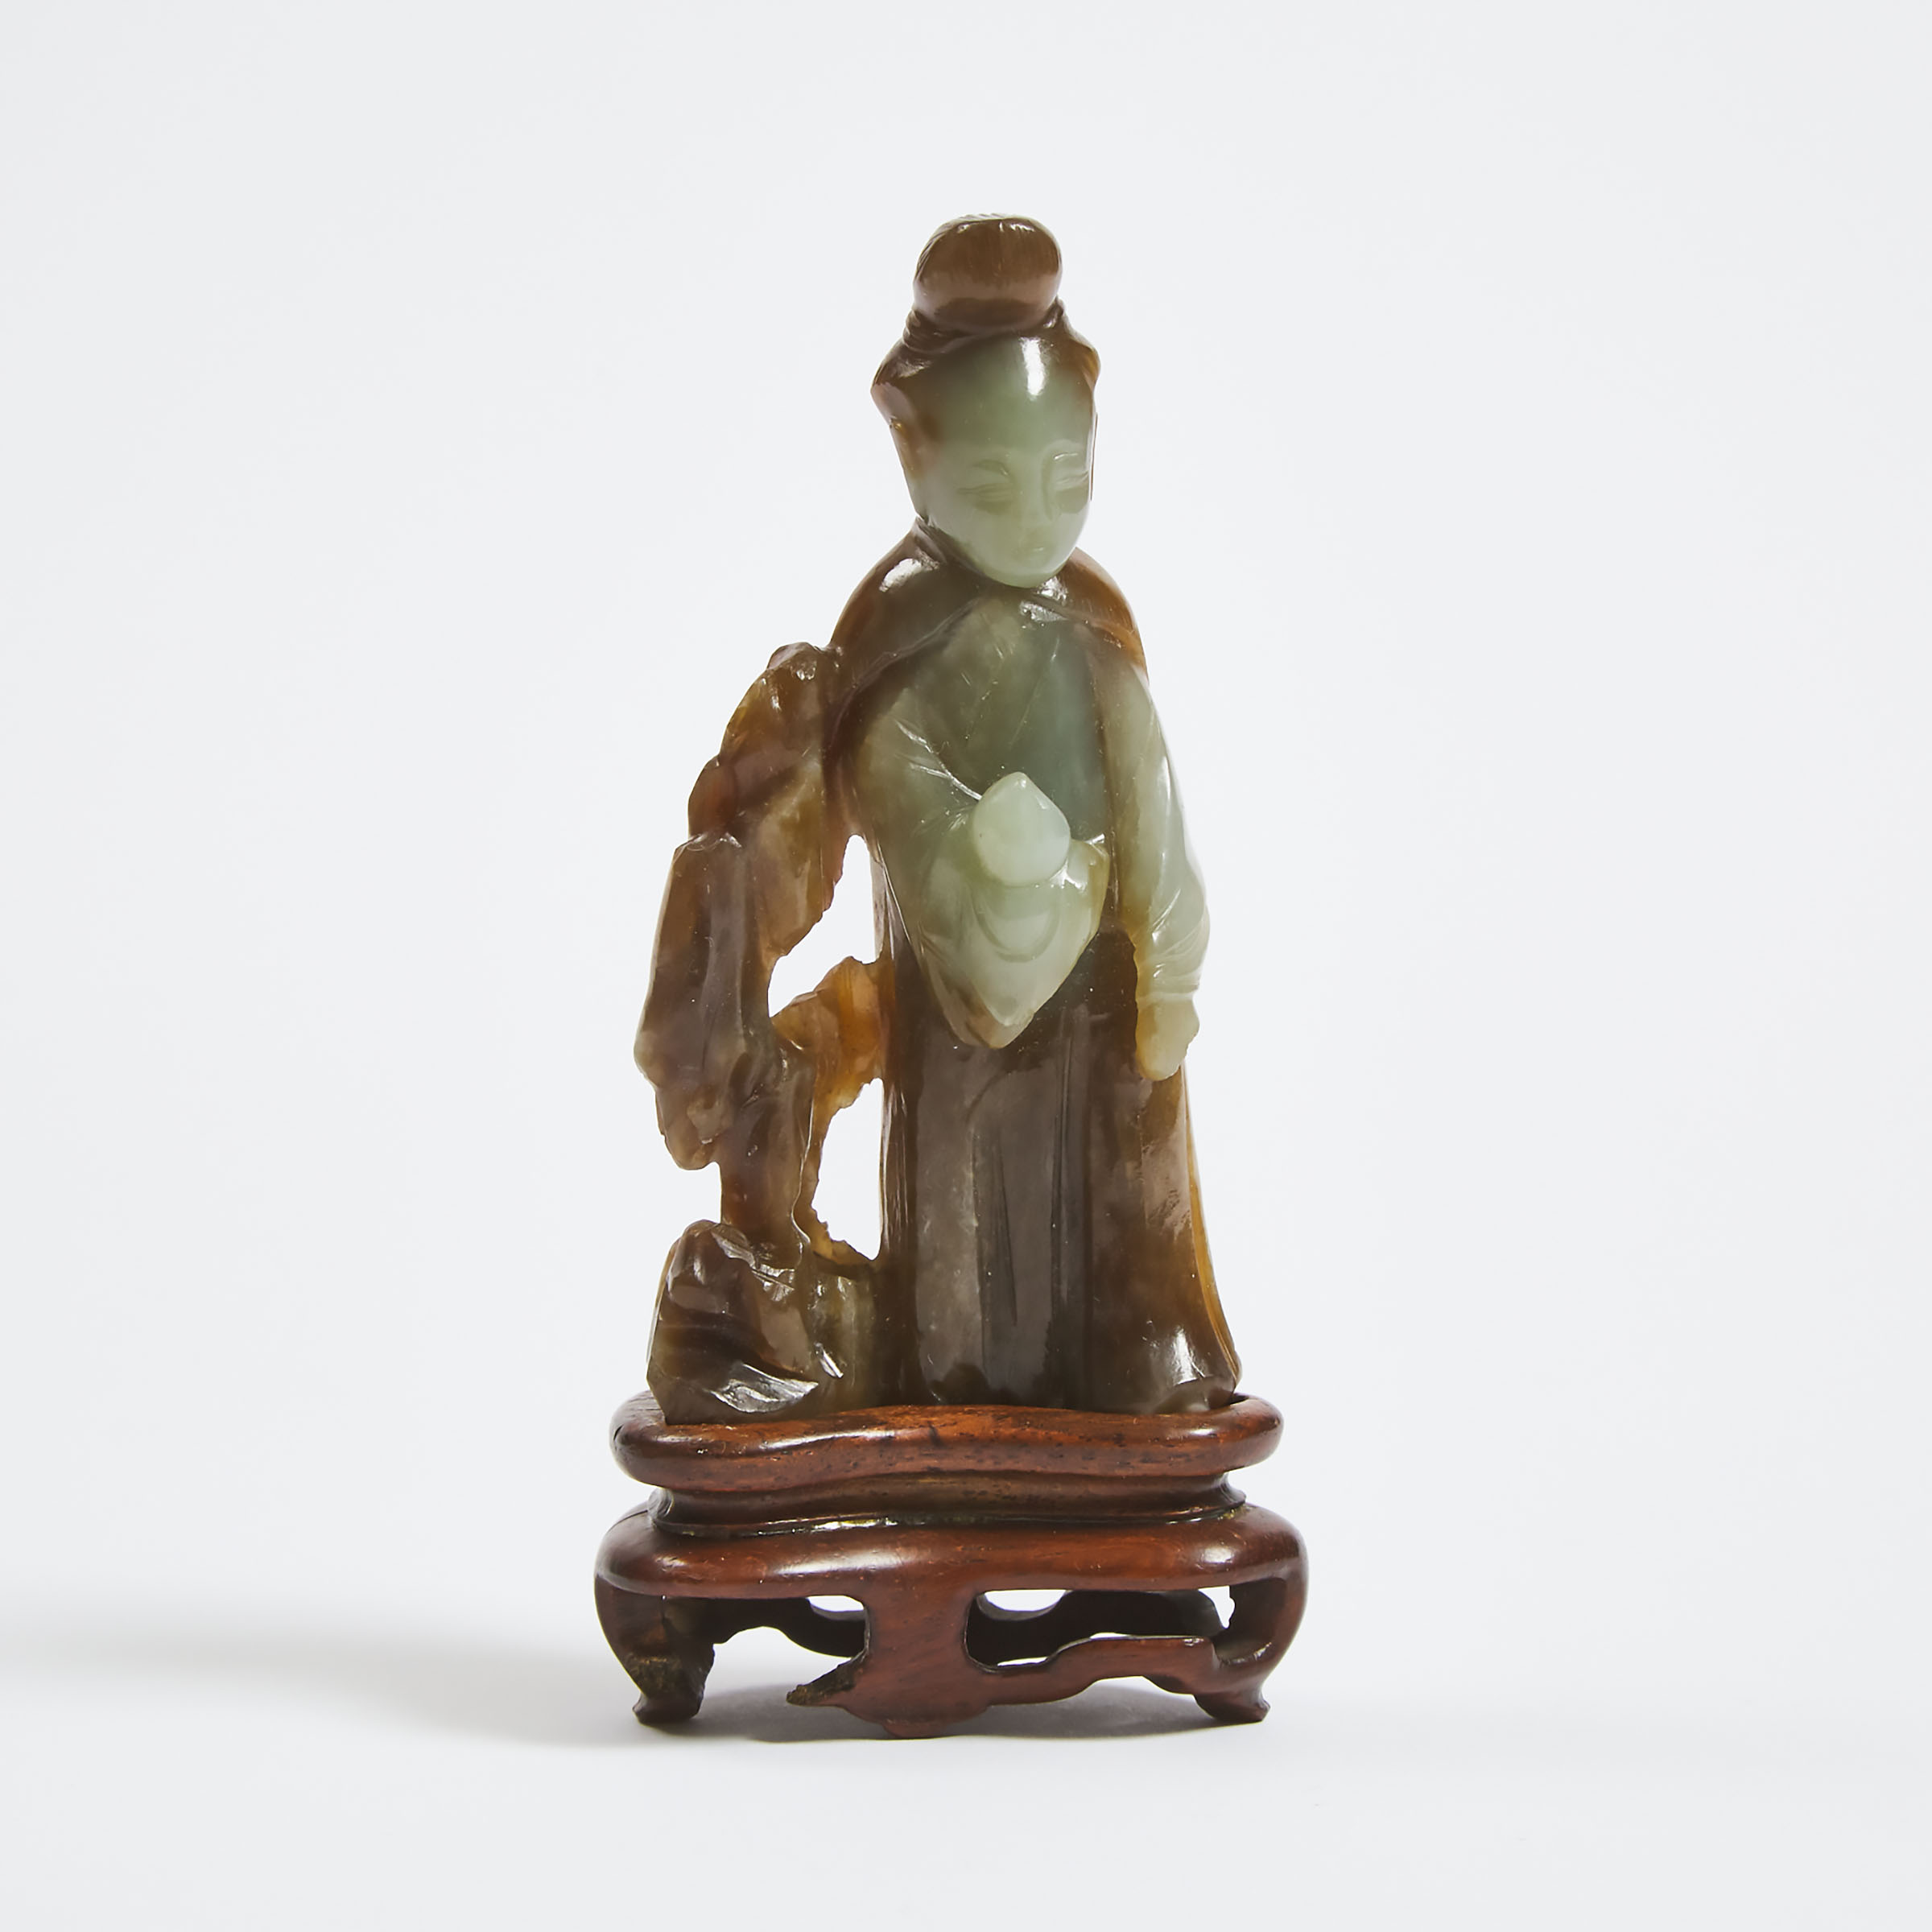 A Celadon and Russet Jade Figure of Magu, Late Ming/Early Qing Dynasty, 17th/18th Century